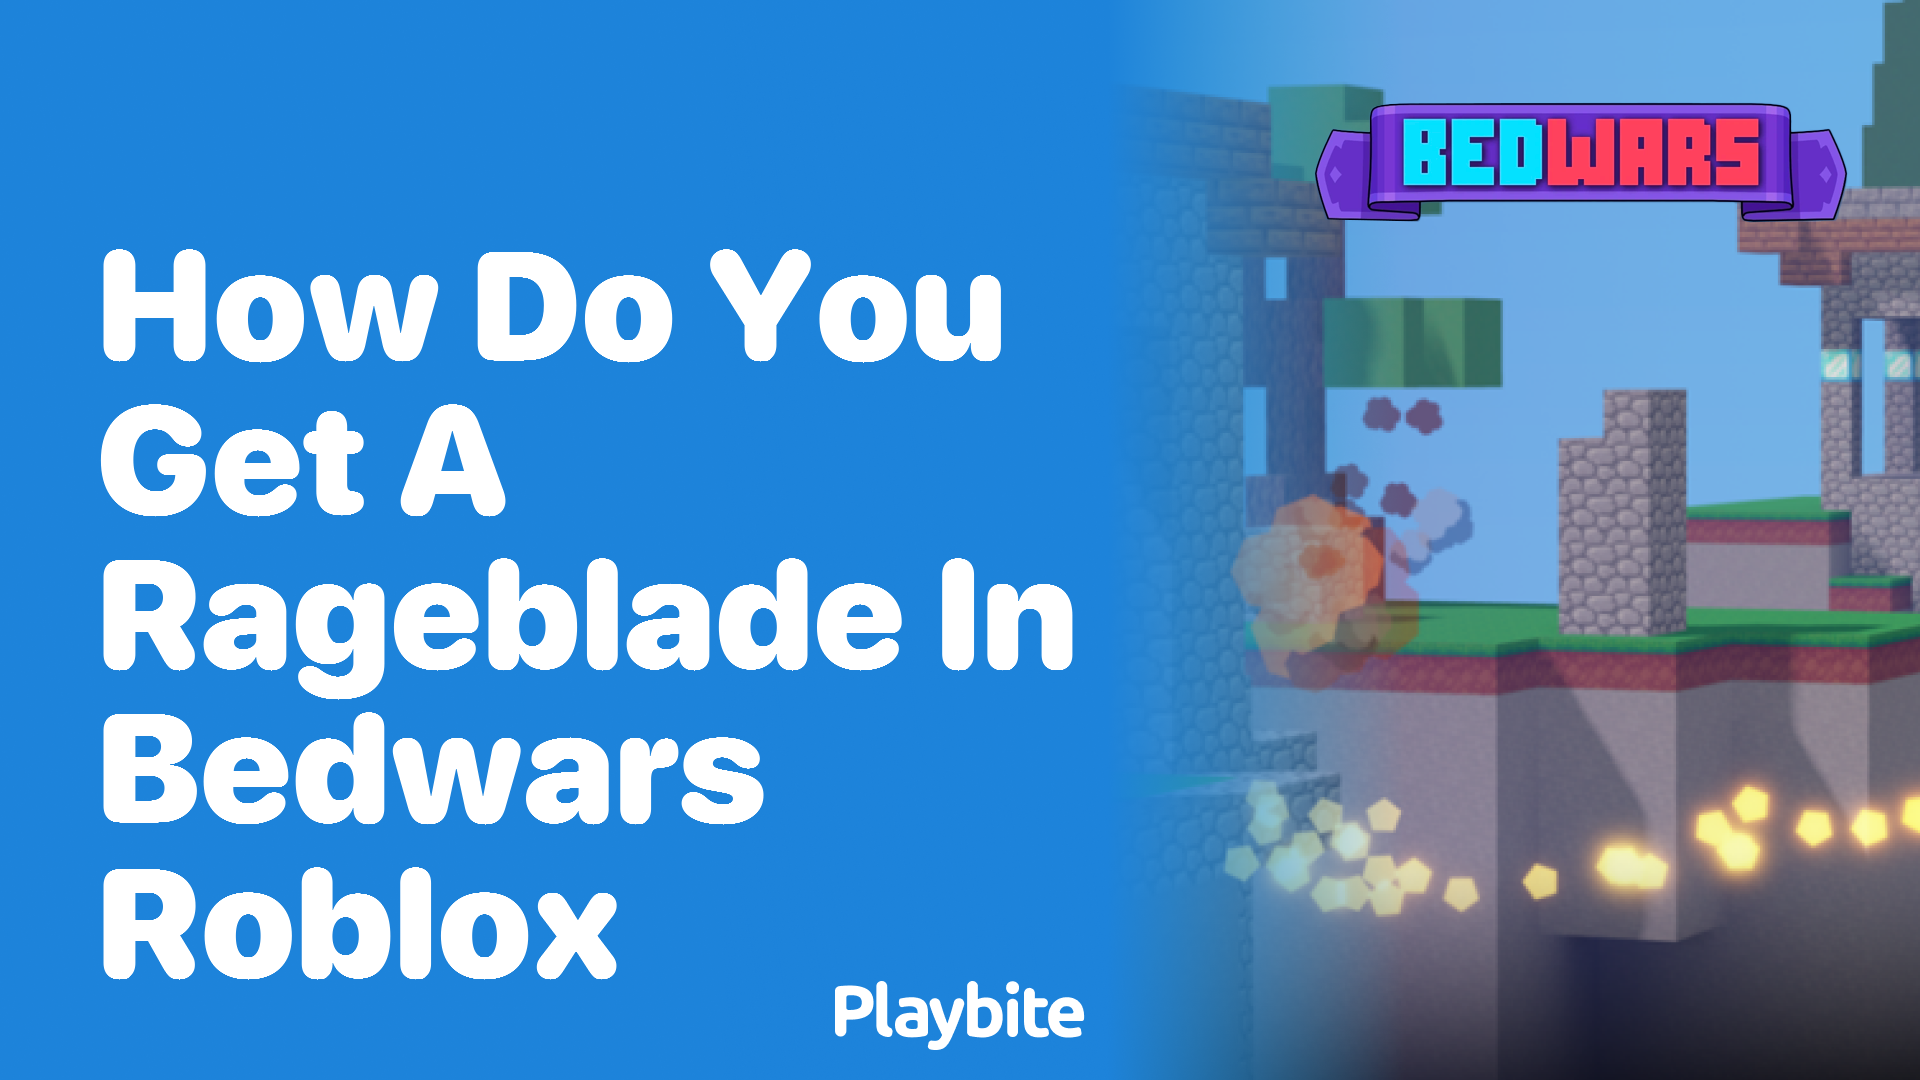 How to get a Rageblade in Bedwars Roblox?